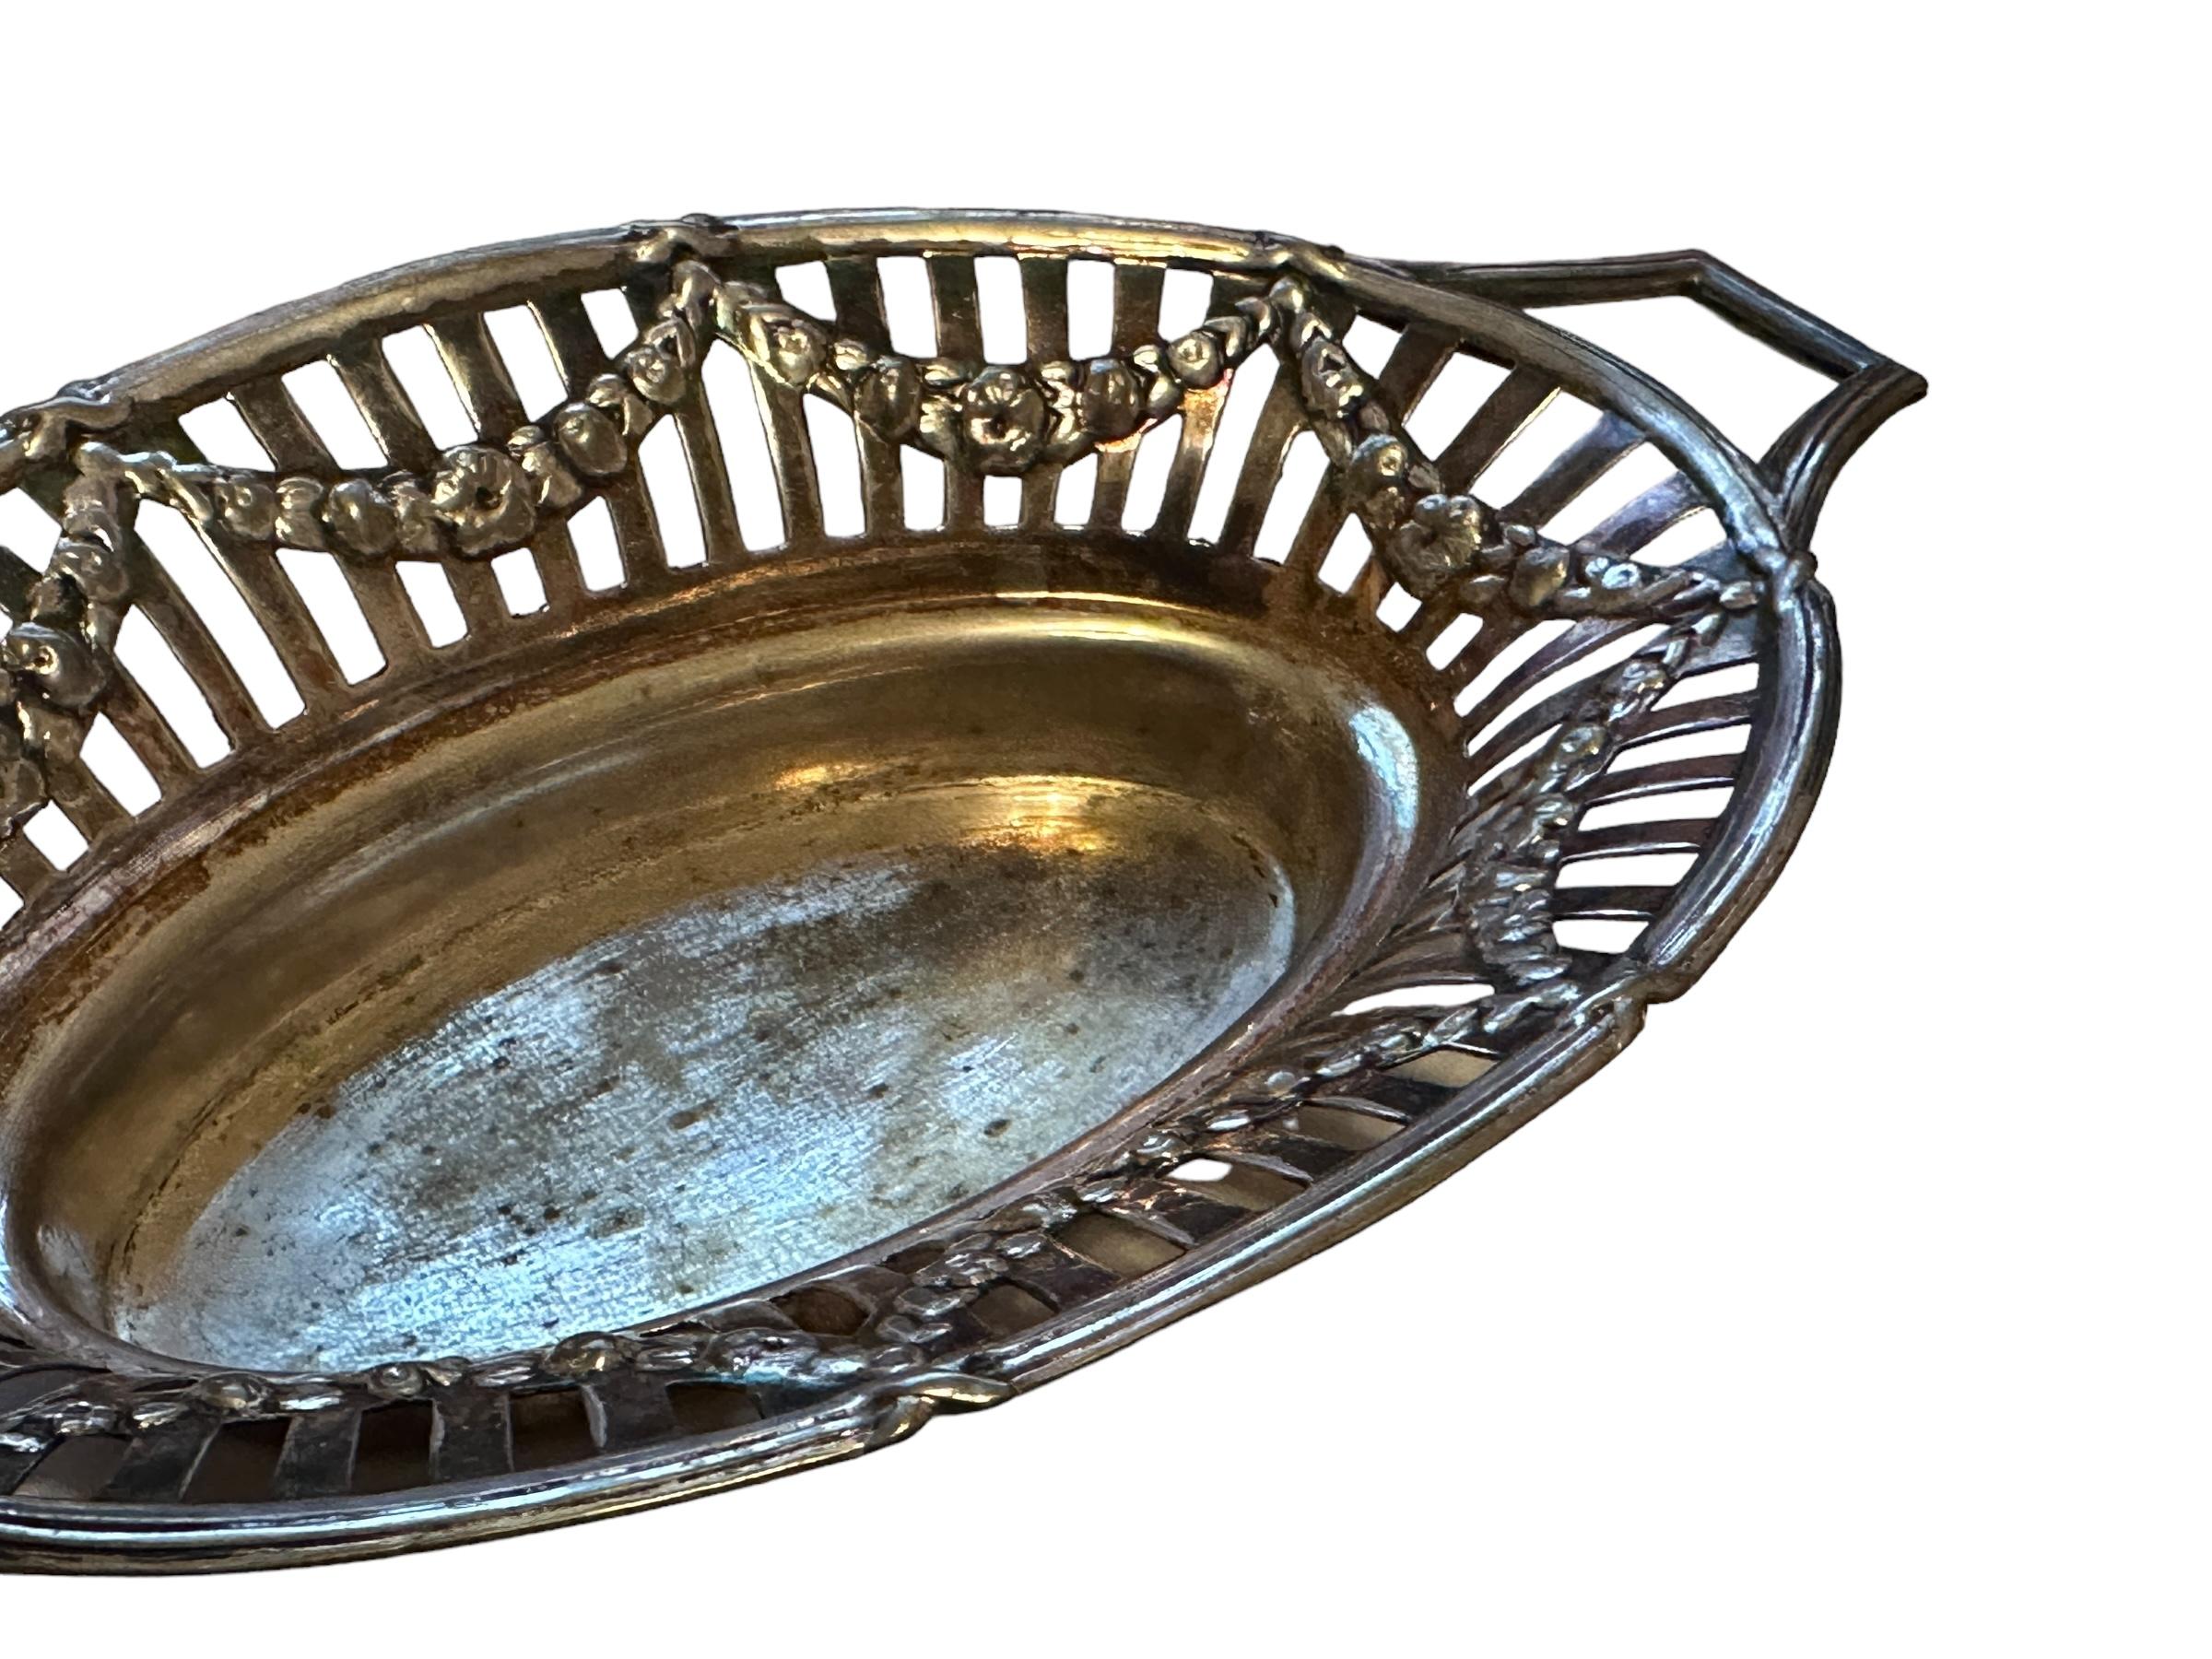 Vintage Silver Plate Candy Dish Basket Tray, 1910s, Germany or Austria For Sale 3